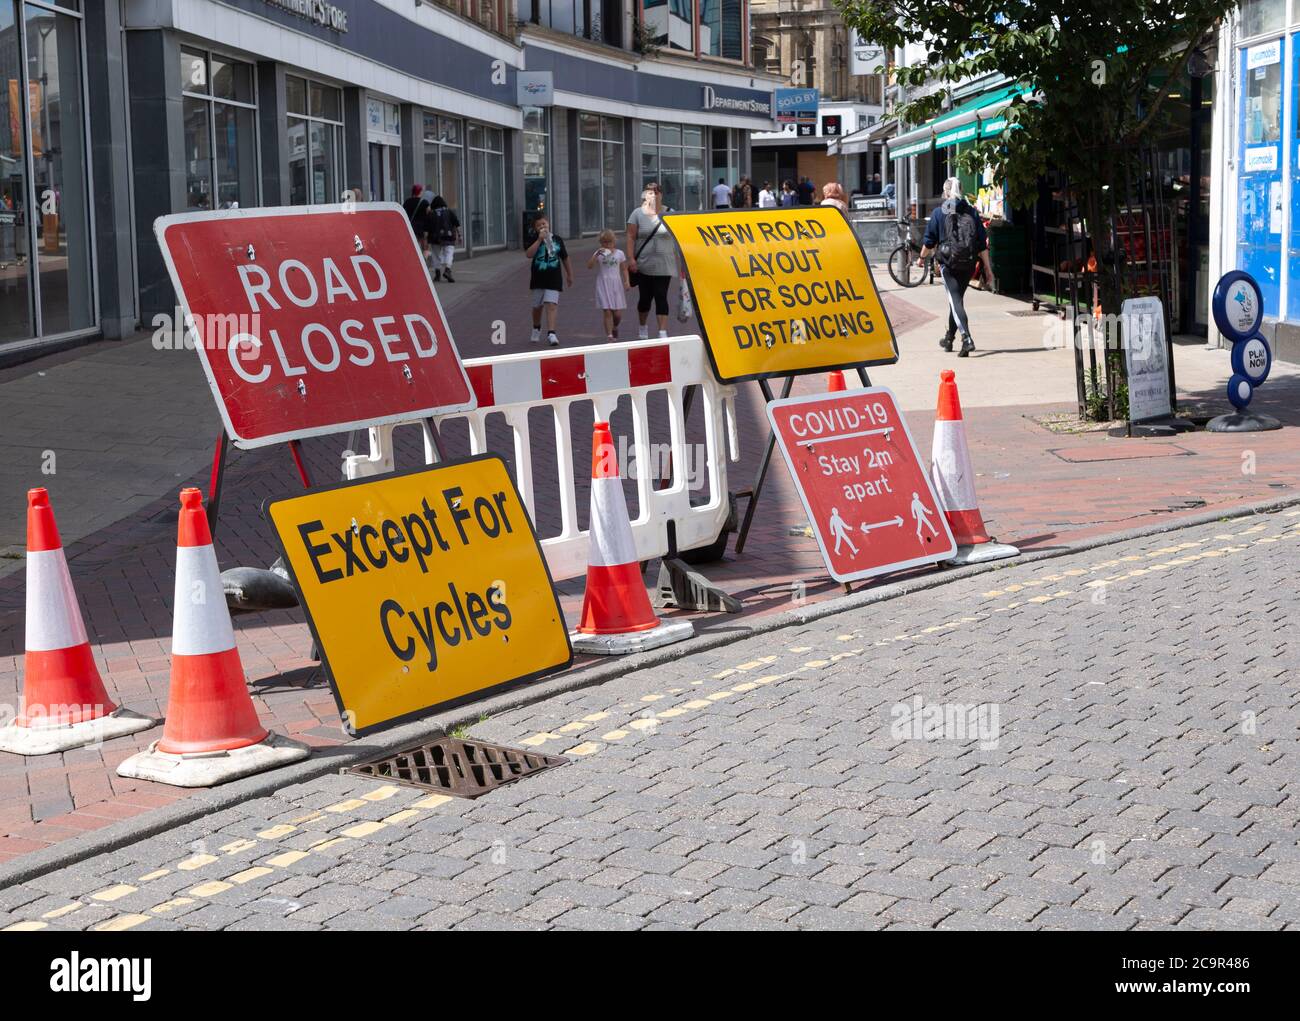 Road closed for new social distancing layout in town centre, Carr Street, Ipswich, Suffolk, England, UK July 2020 Stock Photo